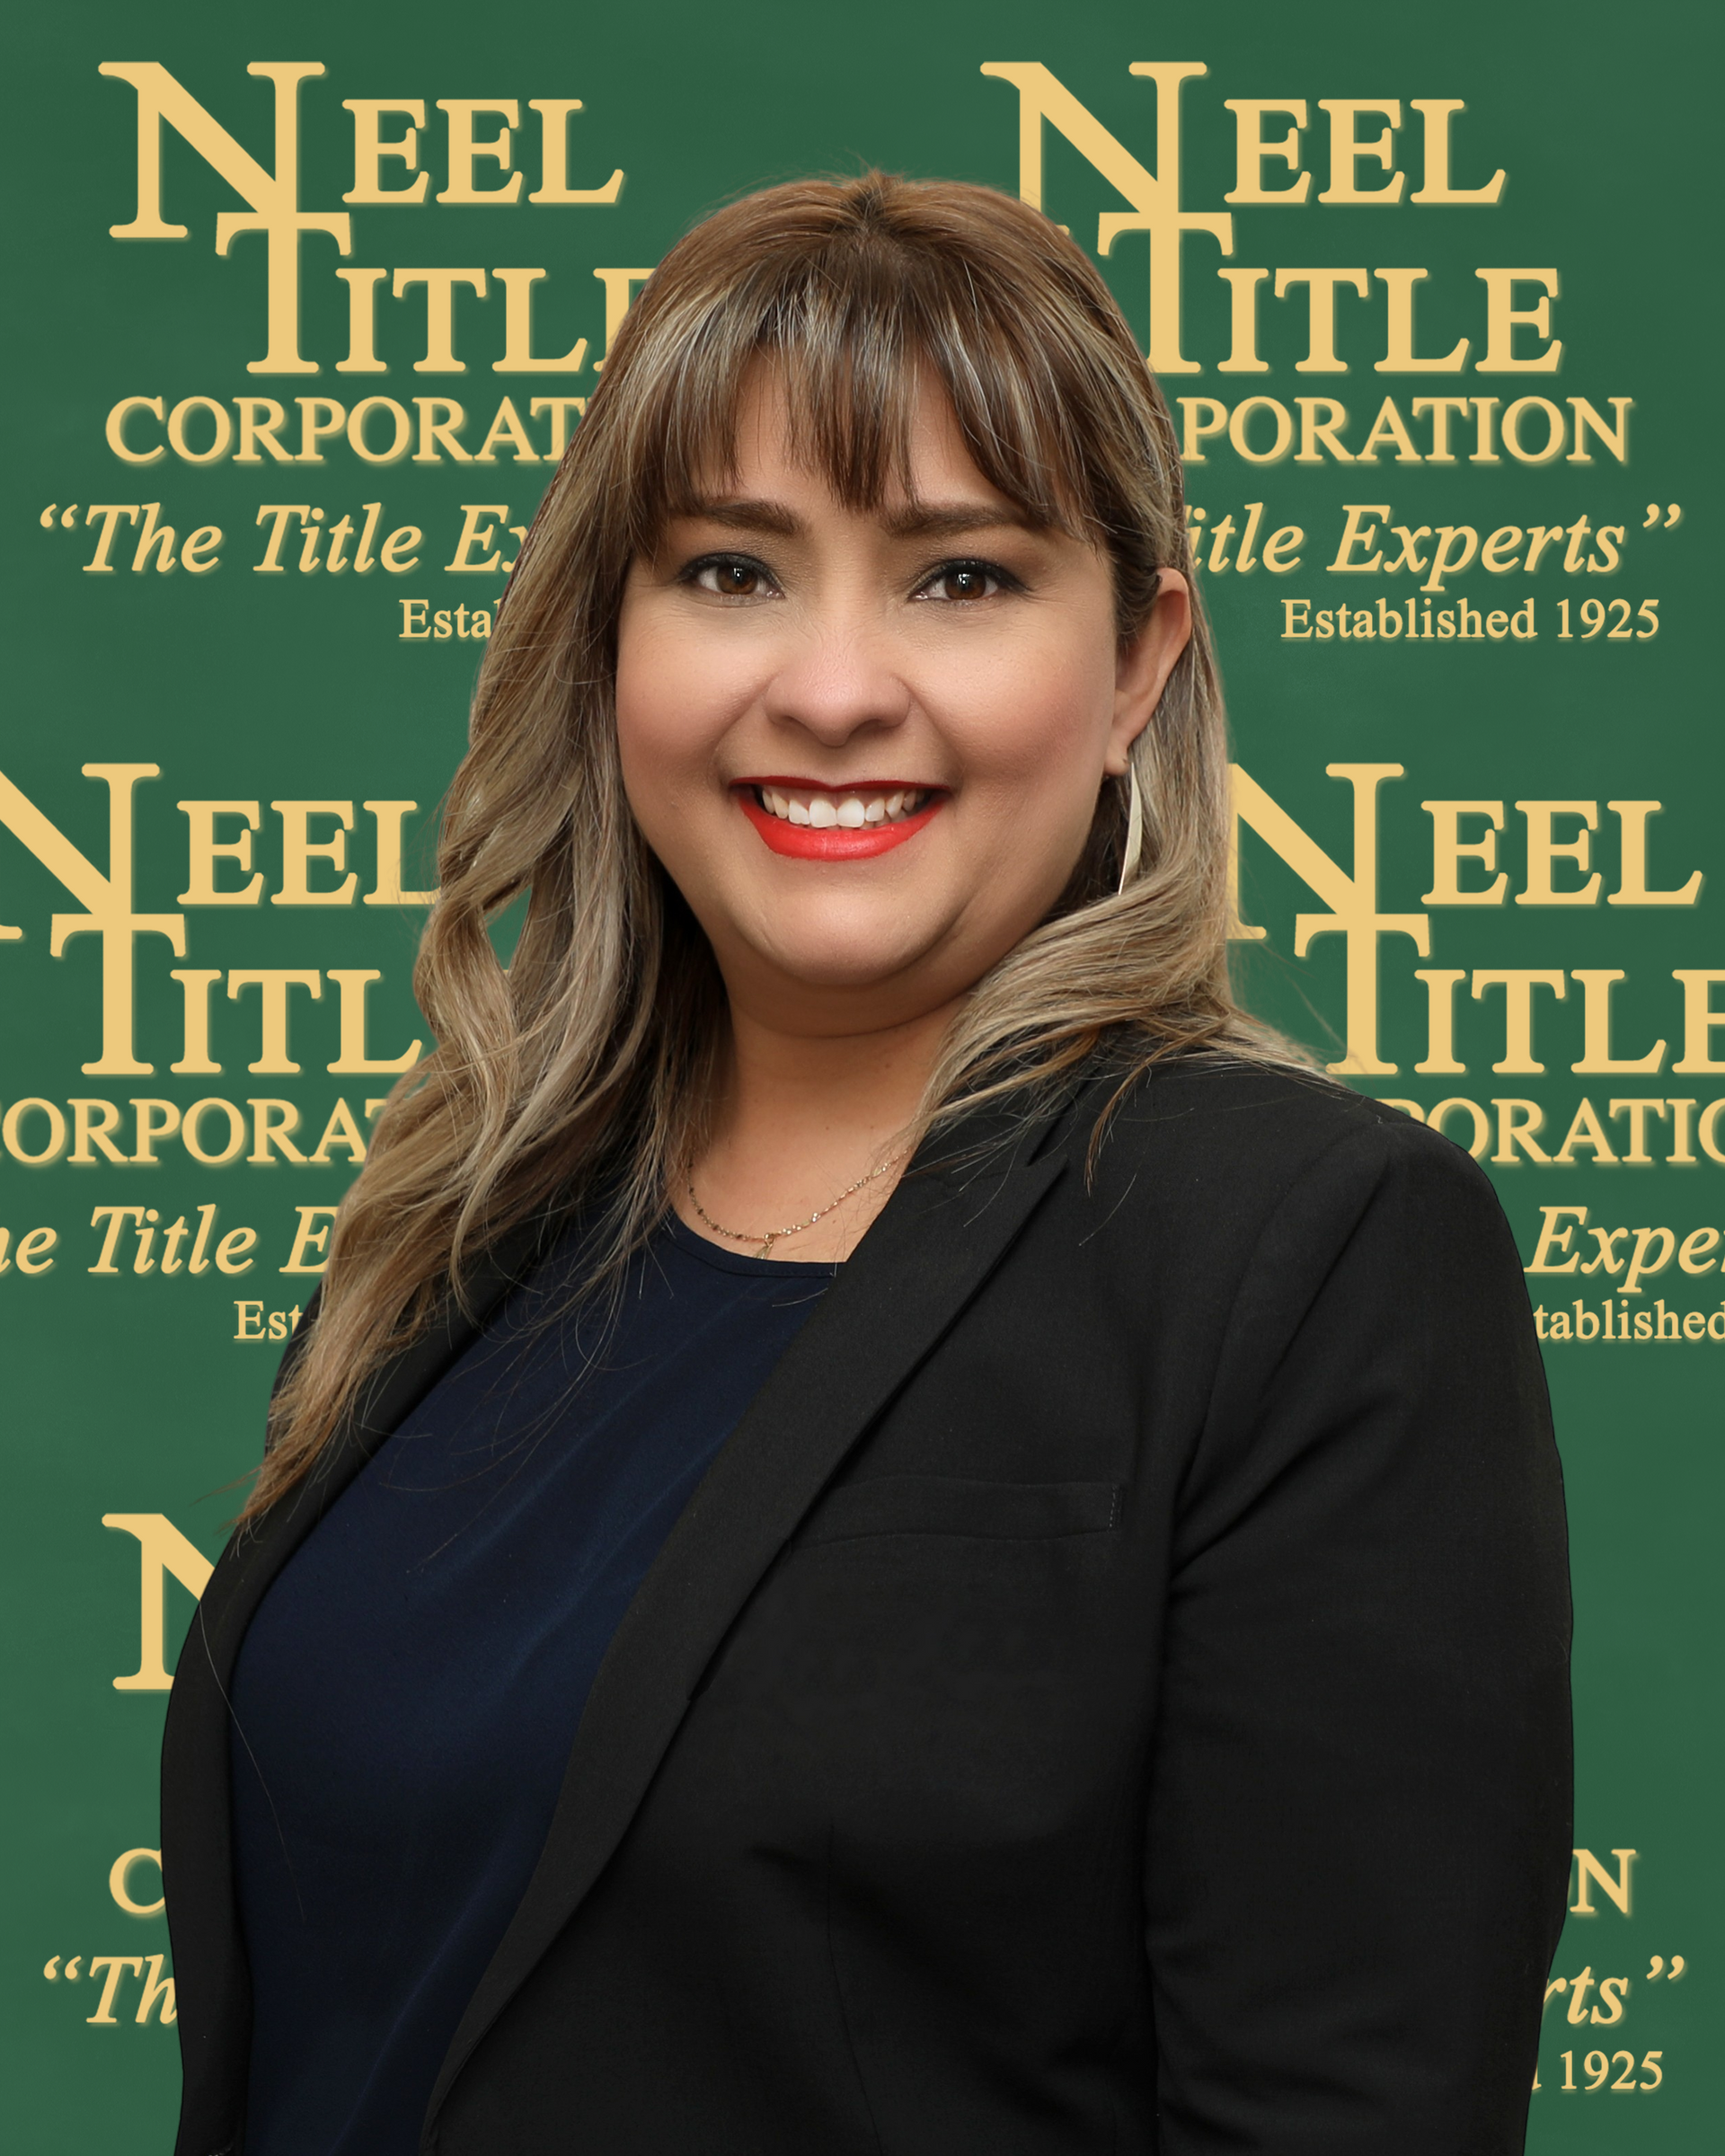 Ana Ponce on Green Background — Laredo, TX — Neel Title